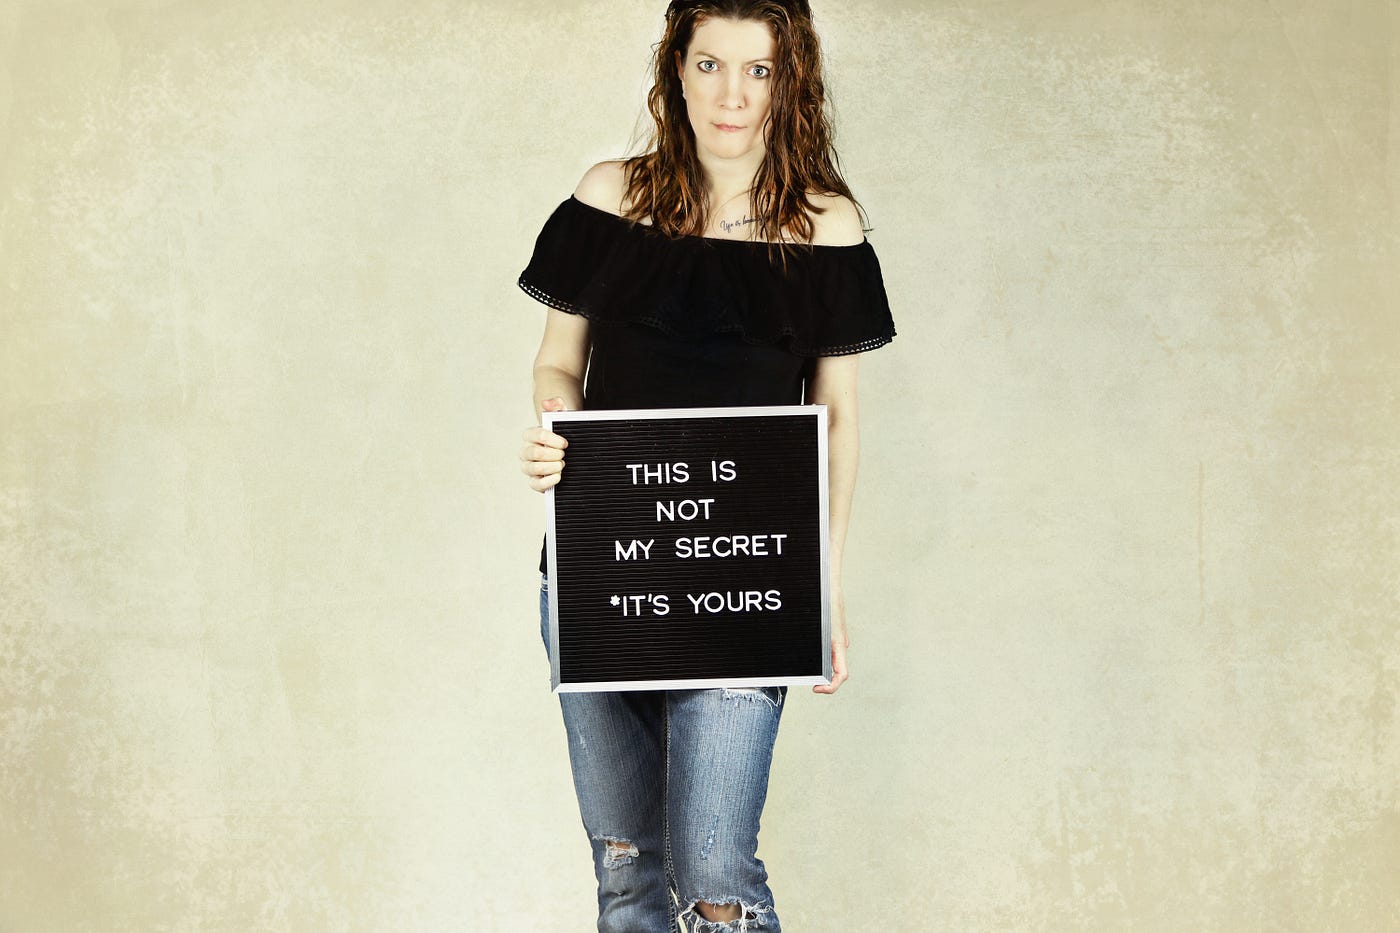 A person holds a sign saying “This is not my secret. *It’s yours.” #sexualassault #trauma #rape